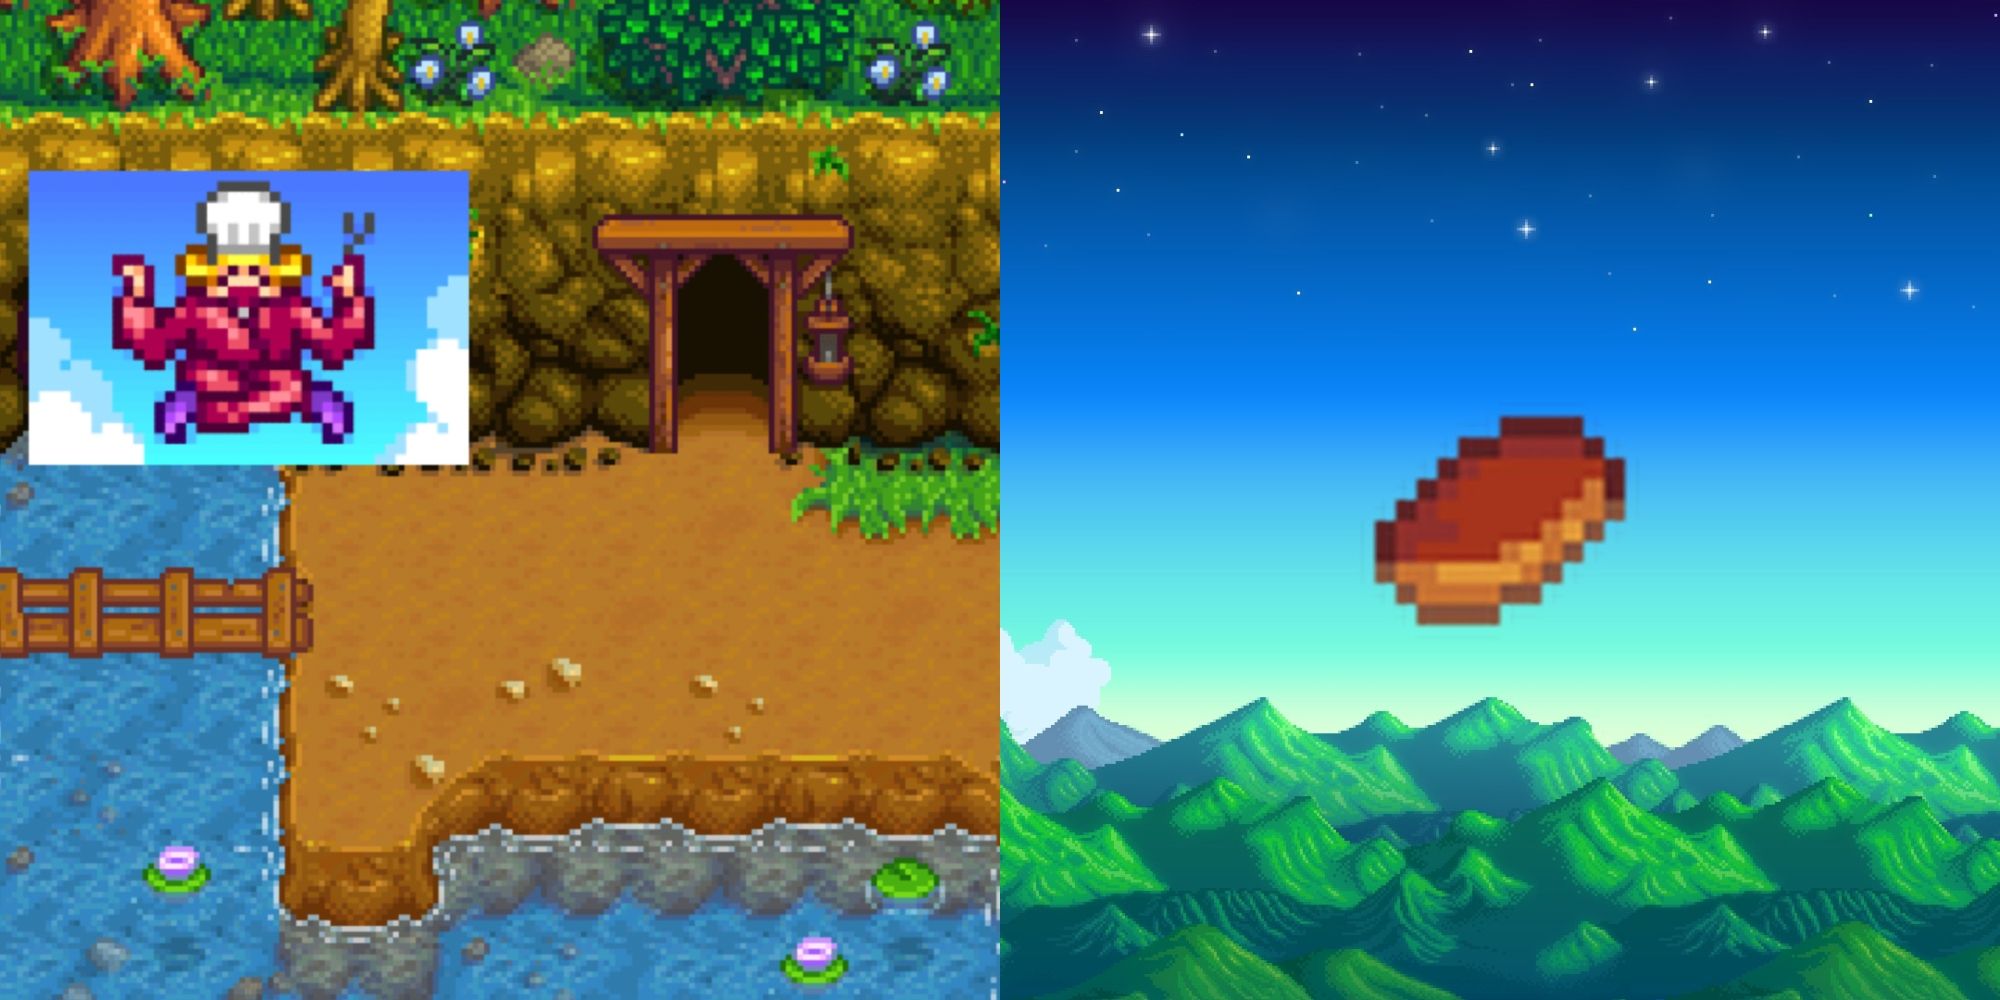 Stardew Valley's Maple Bar beside a picture of the Mines entrance and the Queen of Sauce